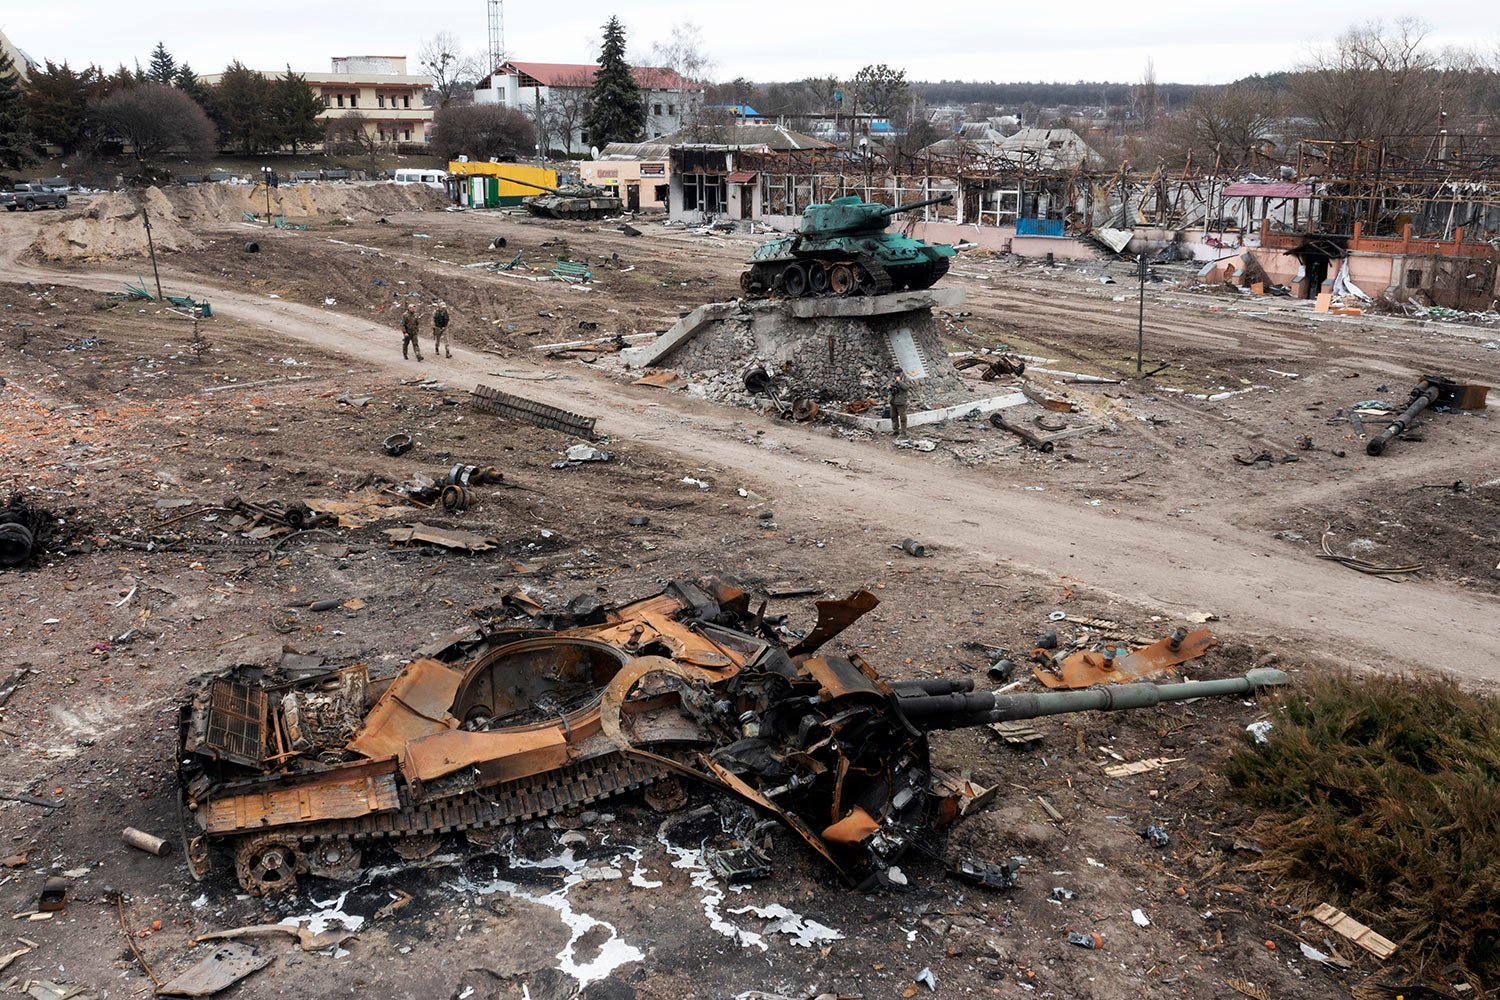  Local residents pass by a damaged Russian tank in the town of Trostyanets, east of capital Kyiv, Ukraine, Monday, March 28, 2022. The monument to Second World War is seen in background. (AP Photo/Efrem Lukatsky) 